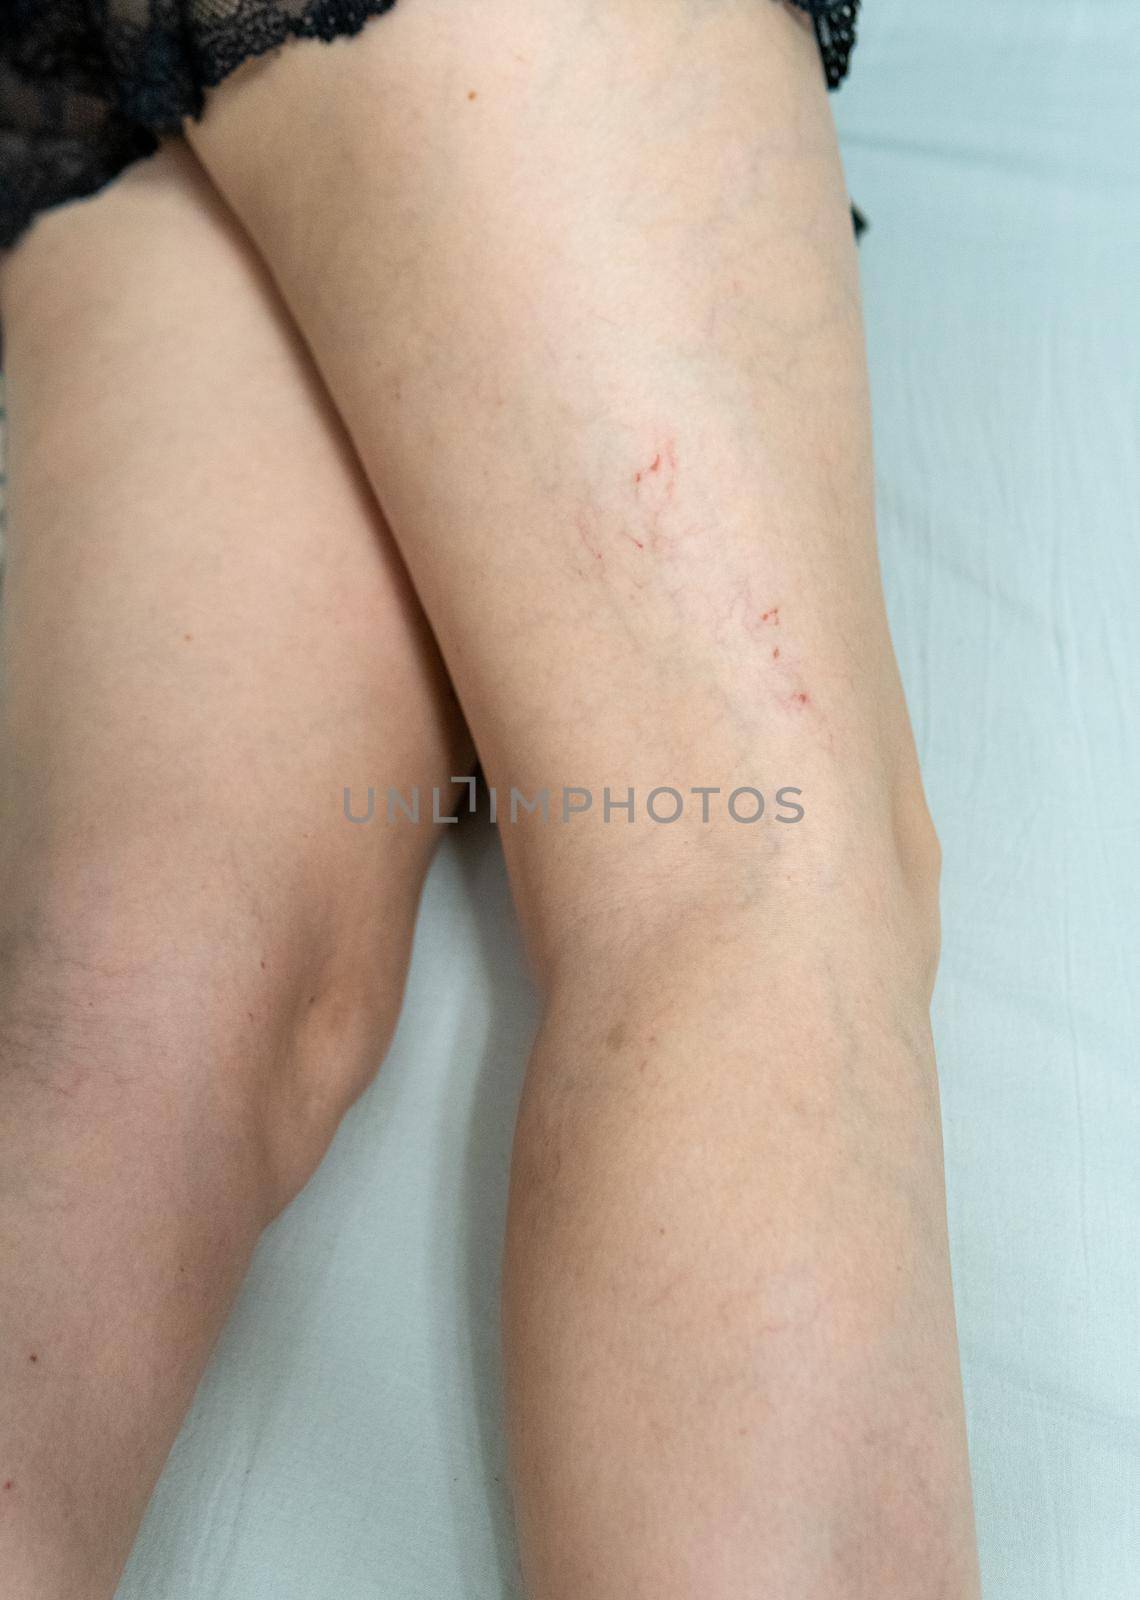 removal of blood vessels by laser vessel dermatology laser skin close up, pain inflammation. Phlebitis risk enlarged, tortuous telangiectases physical